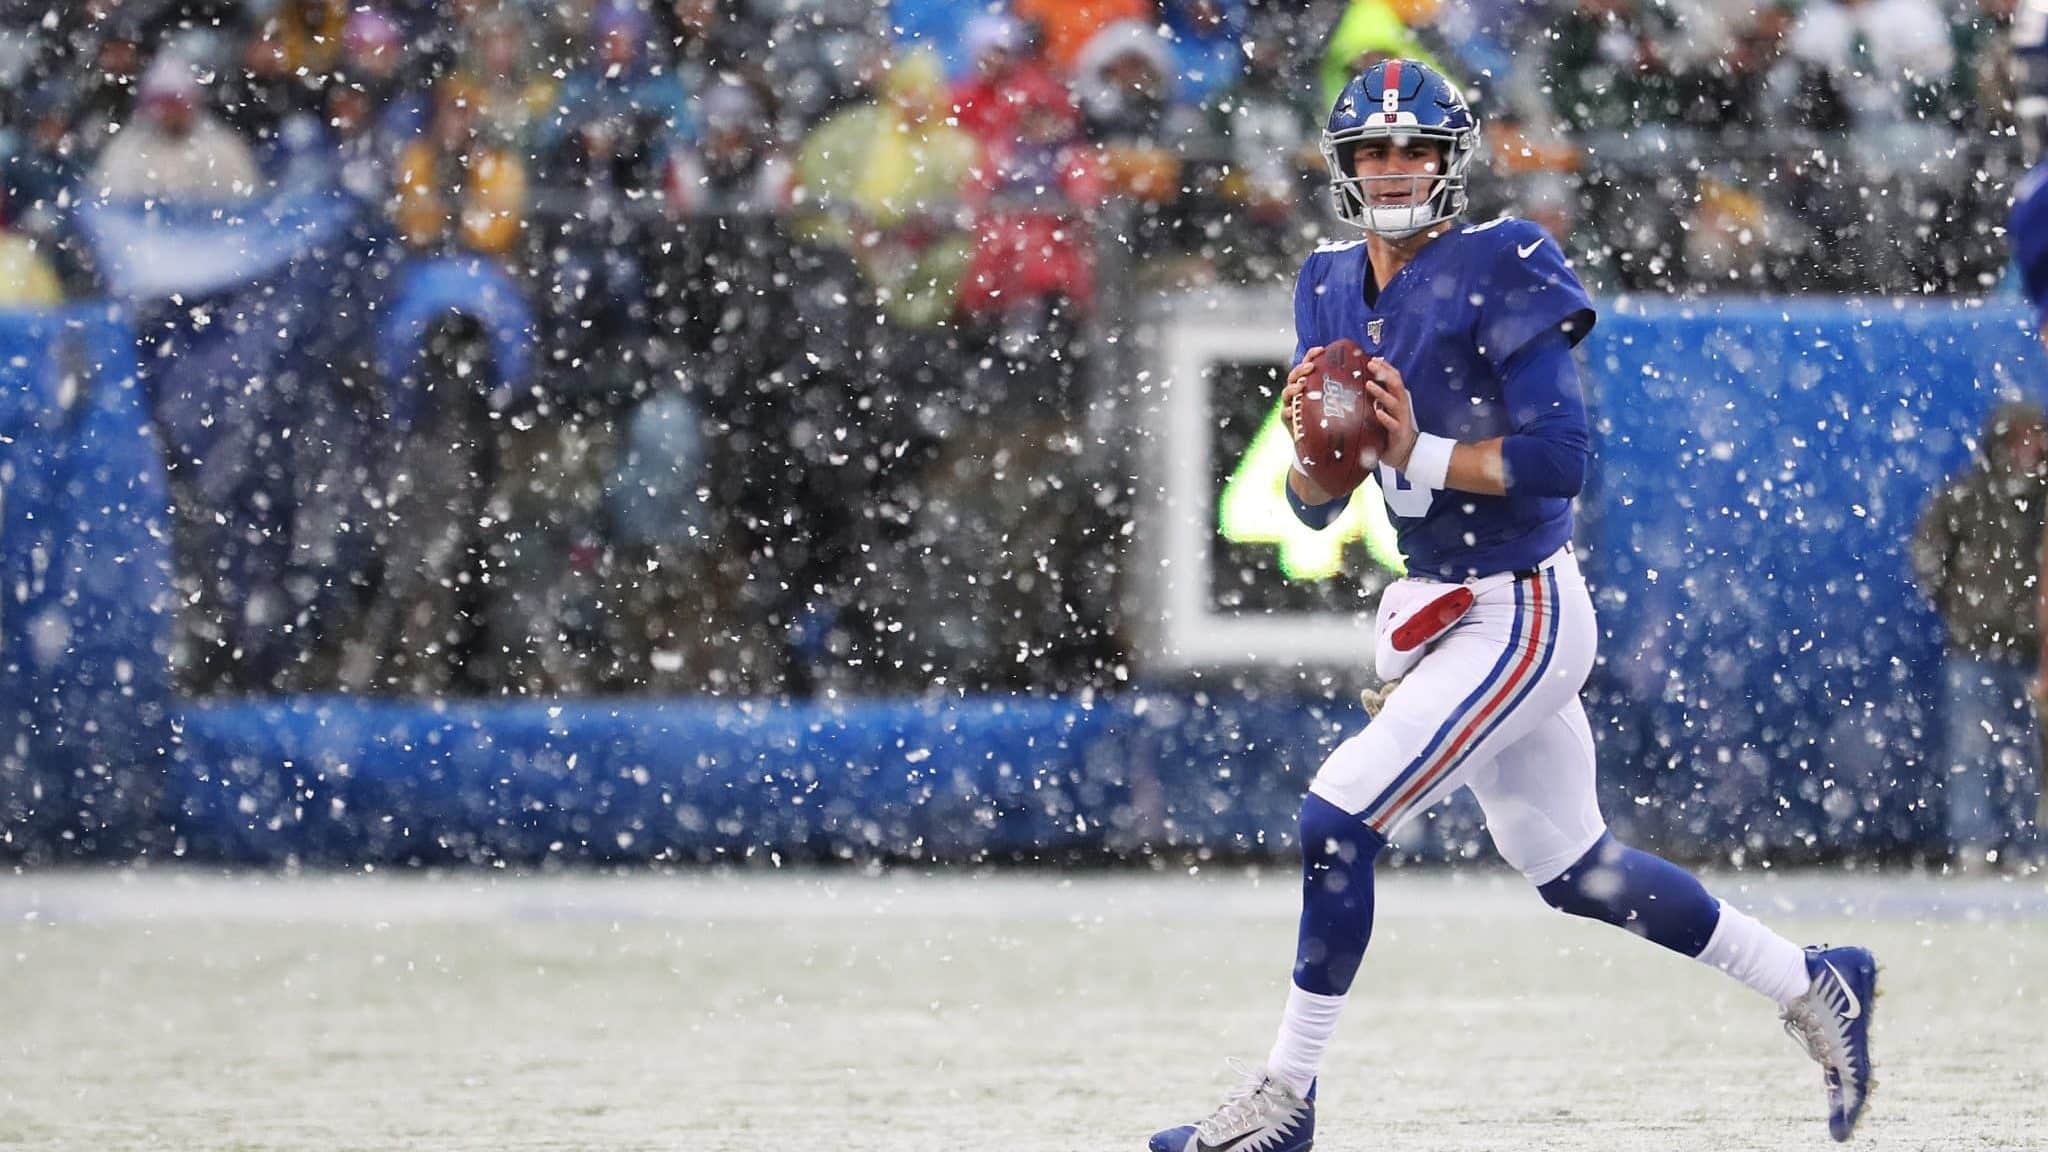 EAST RUTHERFORD, NEW JERSEY - DECEMBER 01: Daniel Jones #8 of the New York Giants in action against the Green Bay Packers during their game at MetLife Stadium on December 01, 2019 in East Rutherford, New Jersey.